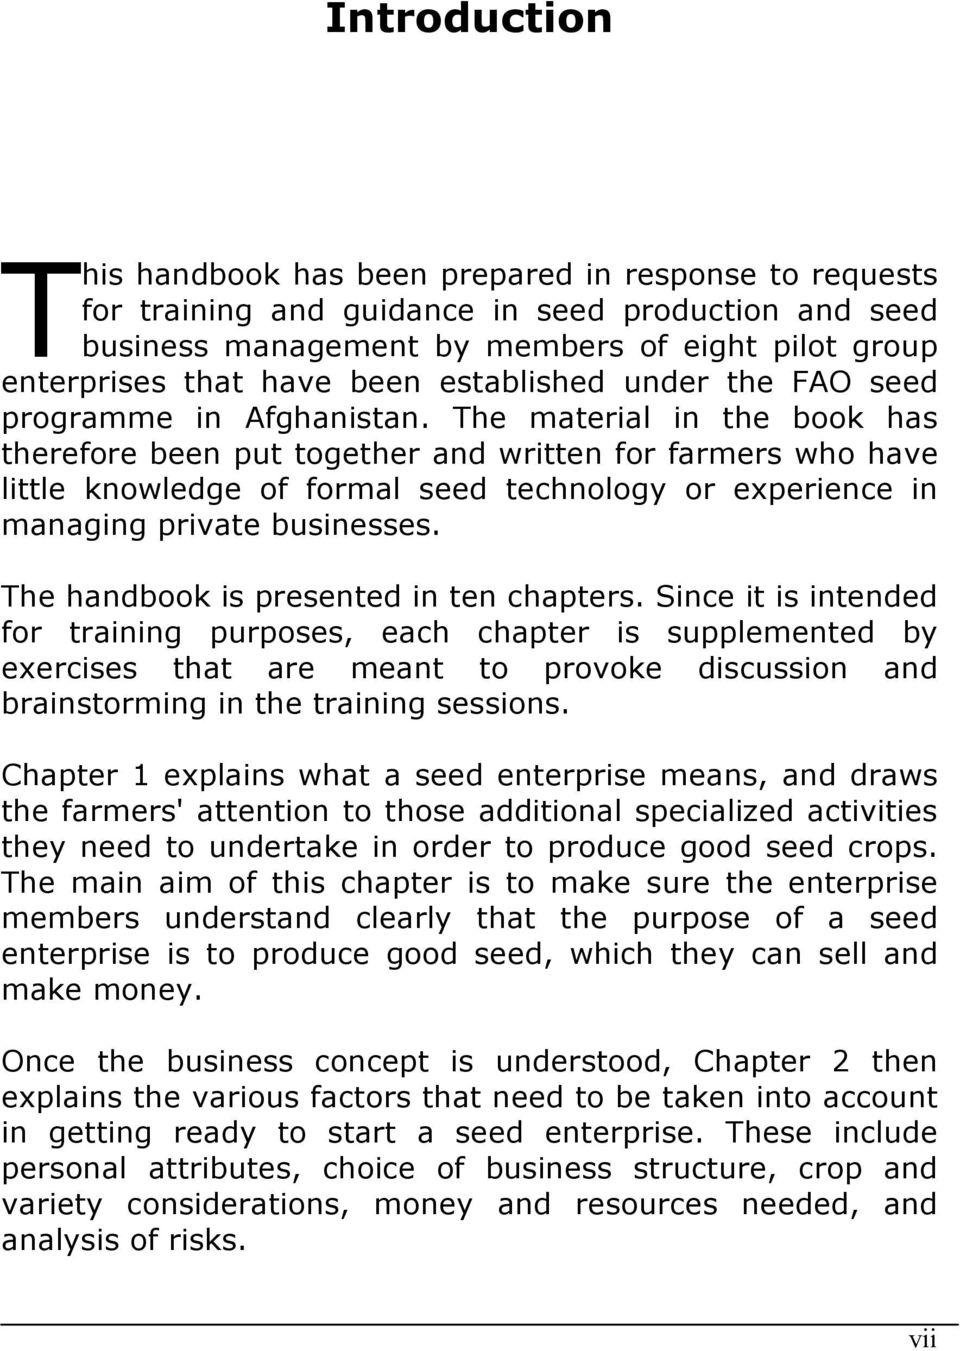 The material in the book has therefore been put together and written for farmers who have little knowledge of formal seed technology or experience in managing private businesses.